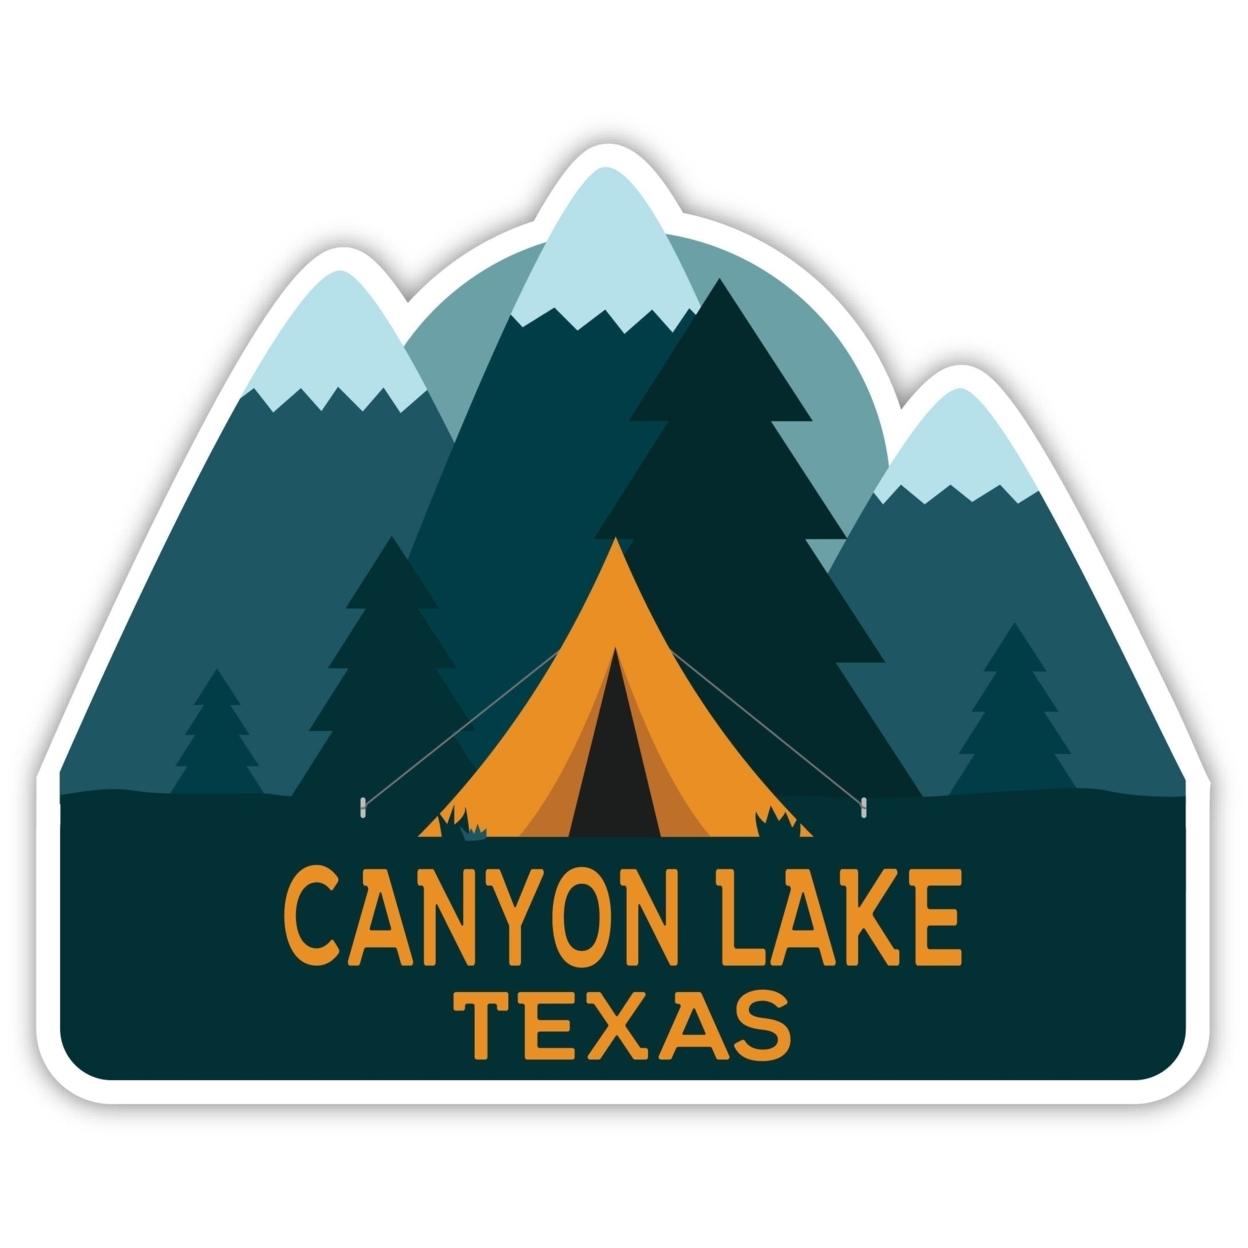 Canyon Lake Texas Souvenir Decorative Stickers (Choose Theme And Size) - 4-Pack, 8-Inch, Adventures Awaits